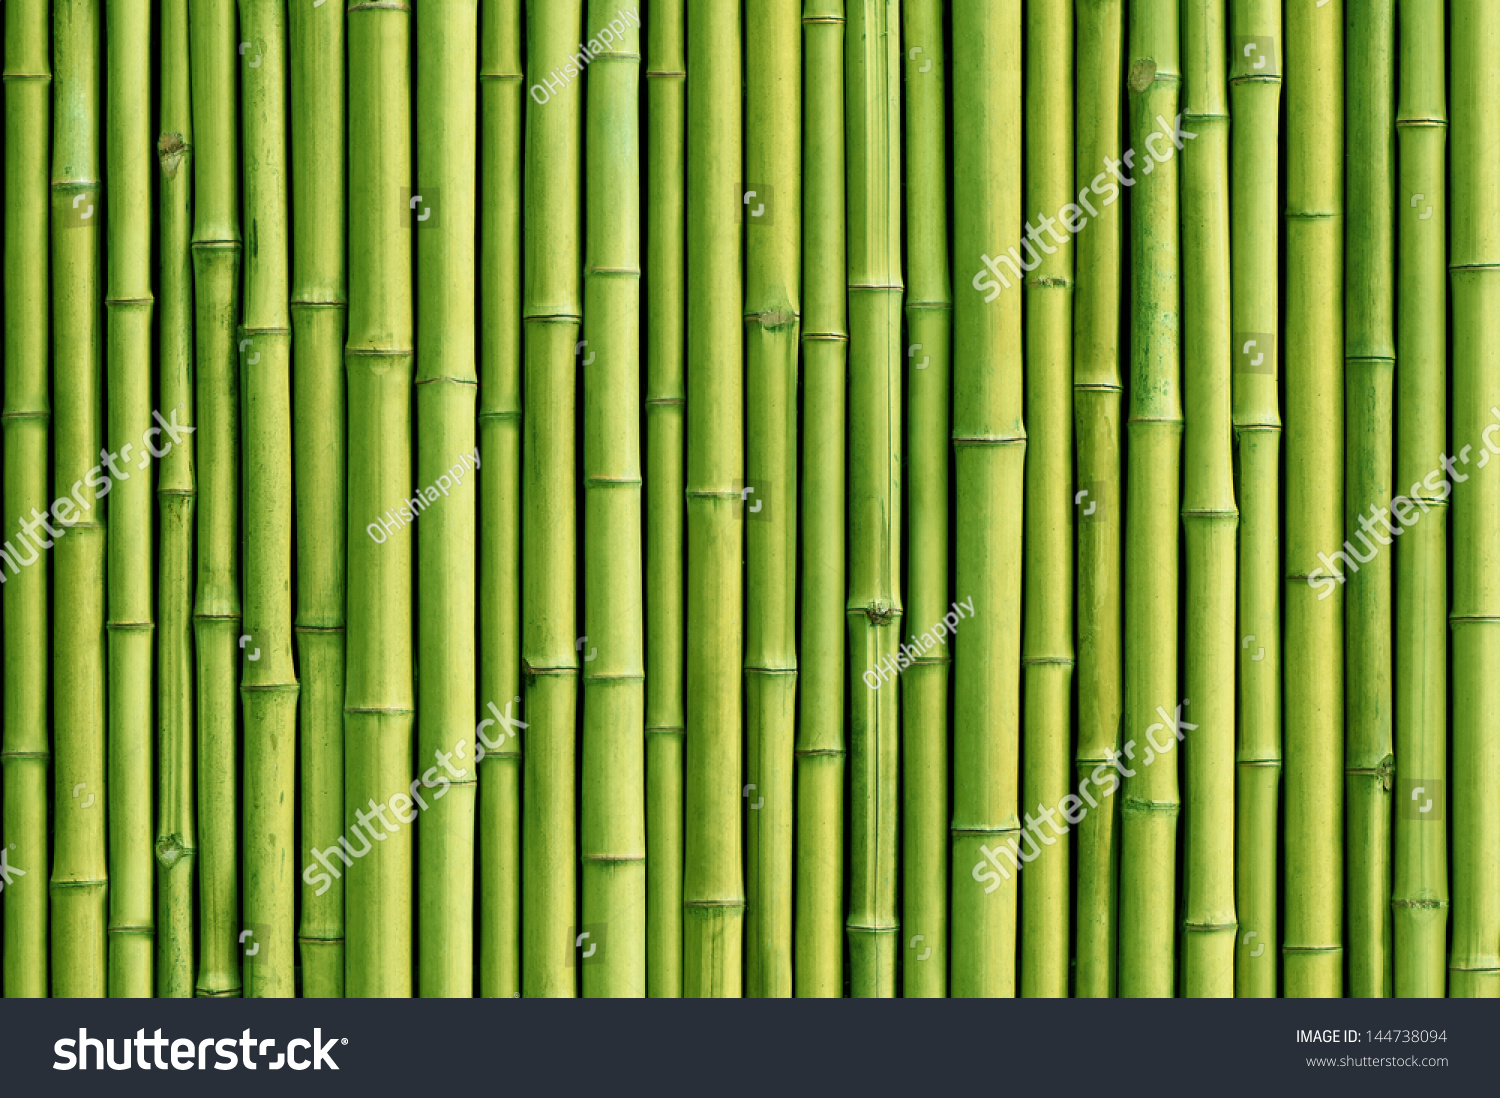 green bamboo fence background #144738094